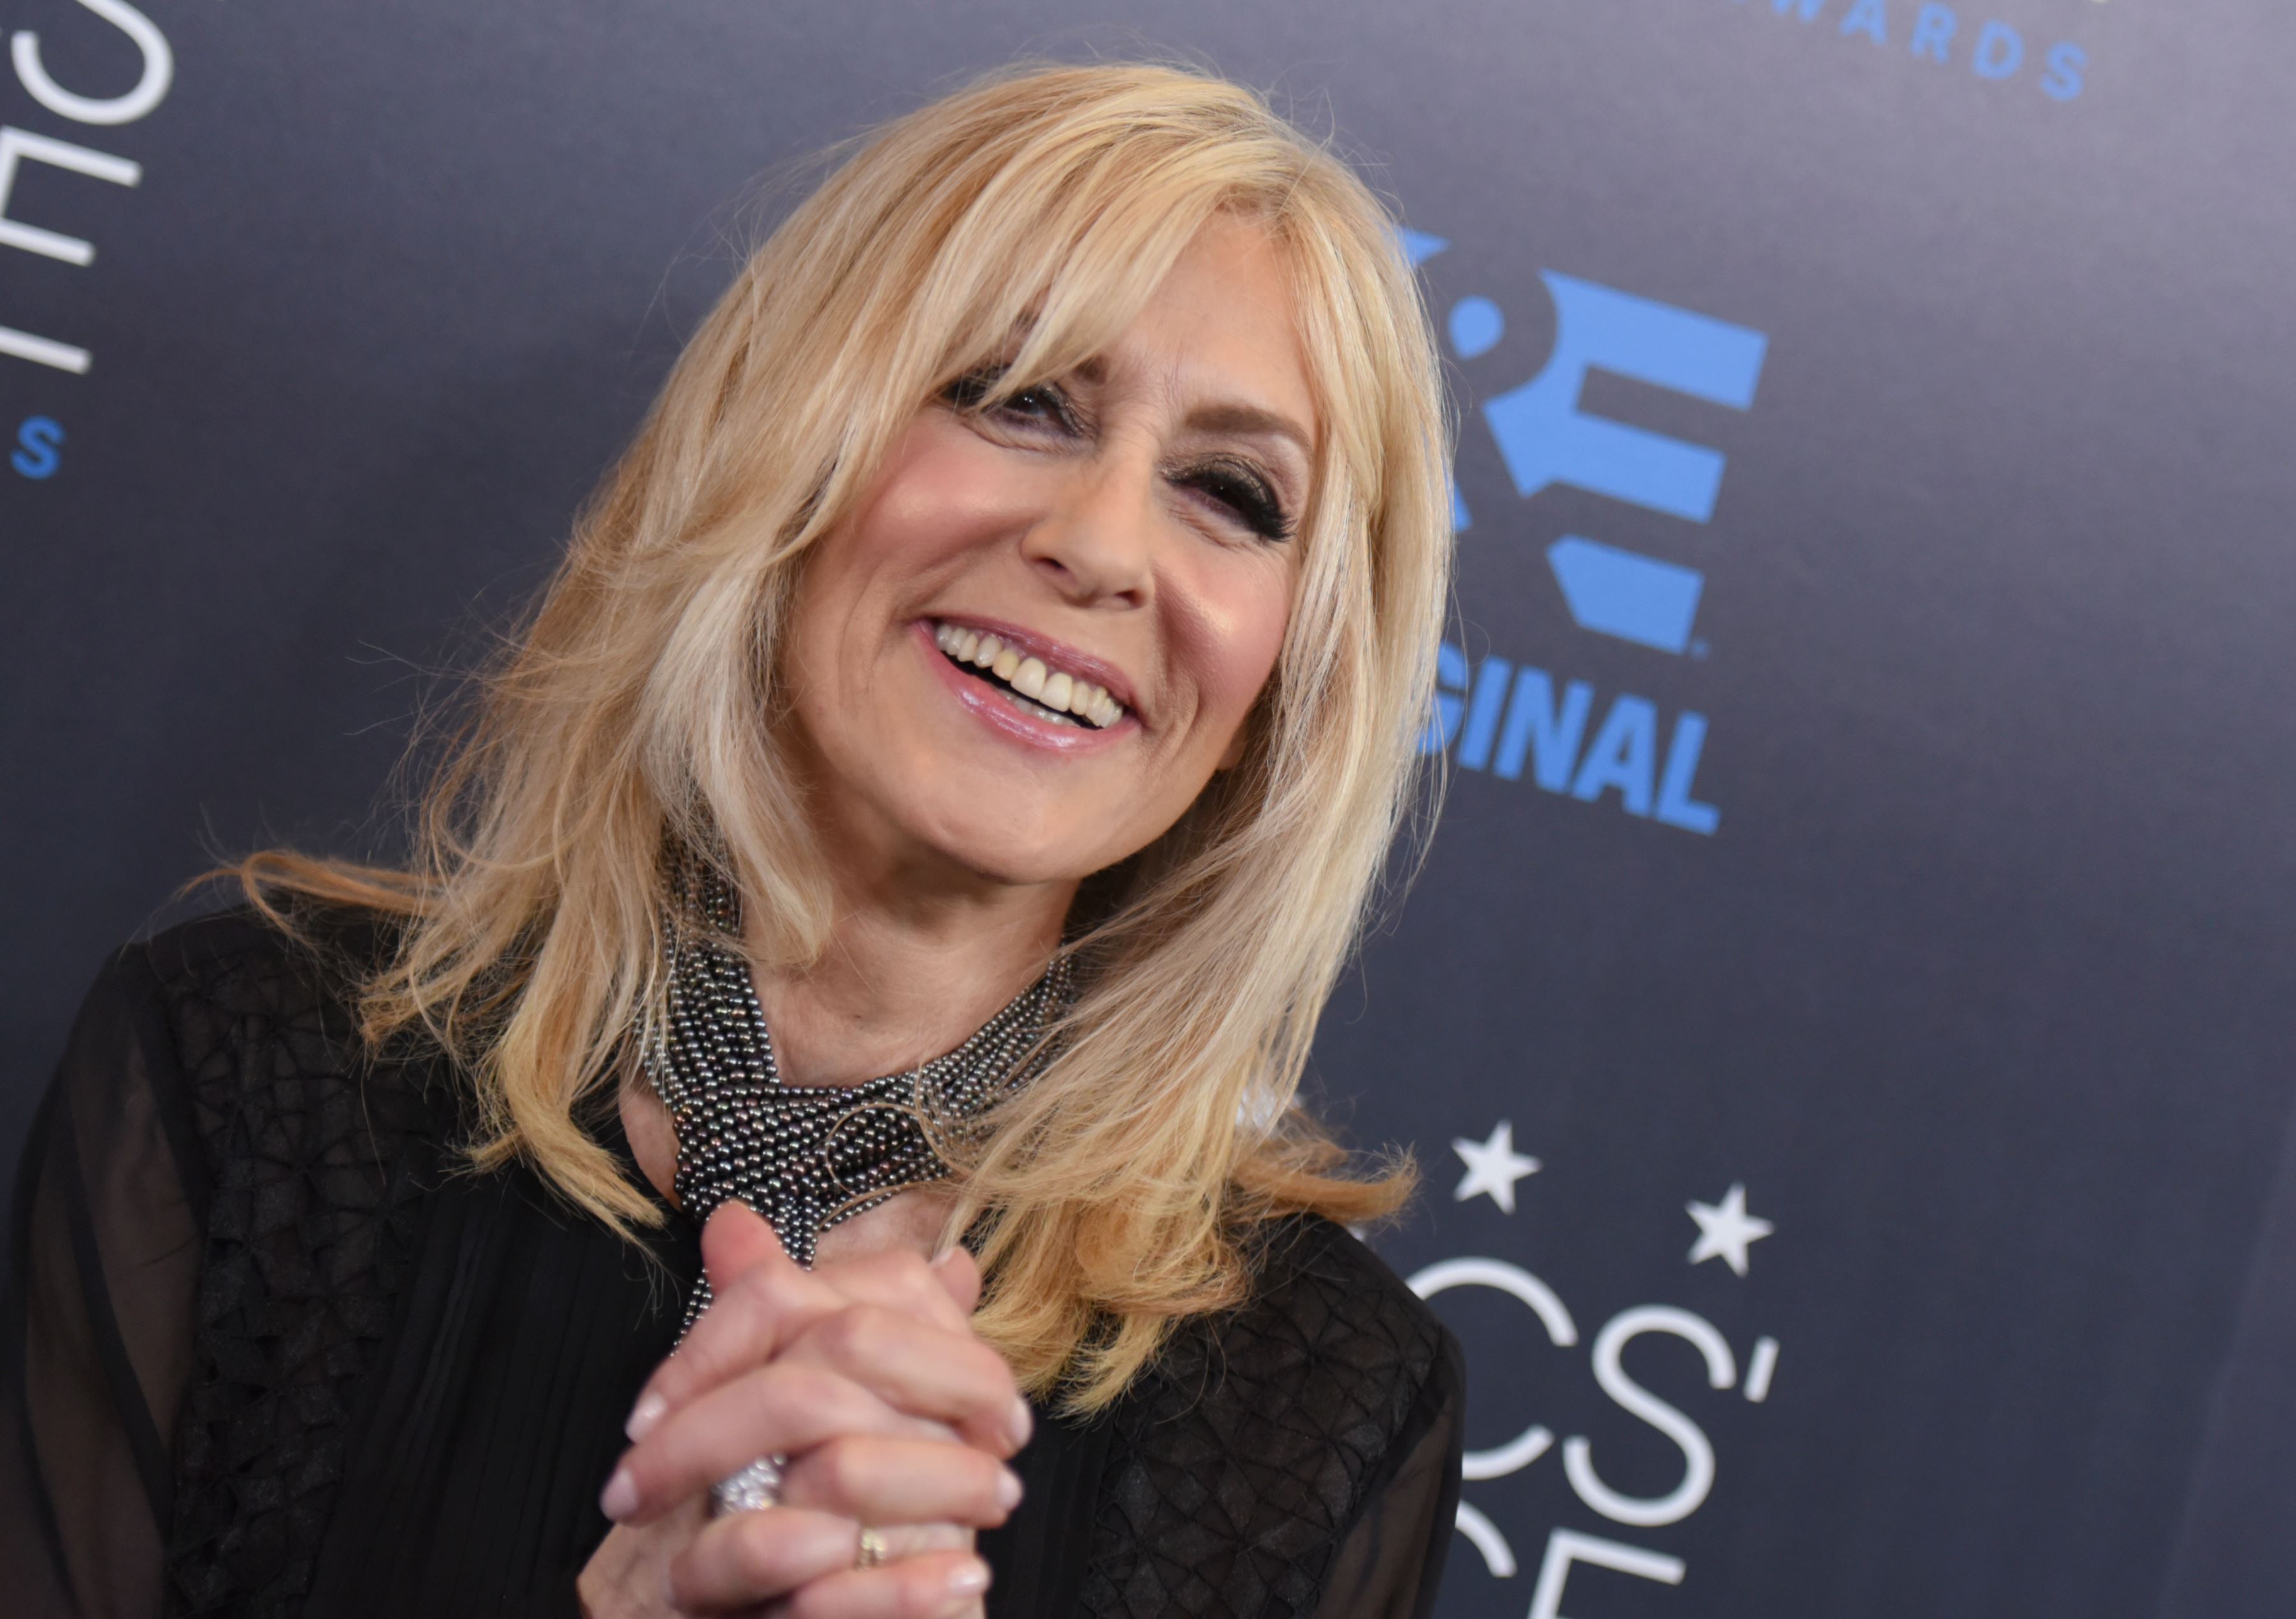 More Pictures Of Judith Light. judith light photos. 